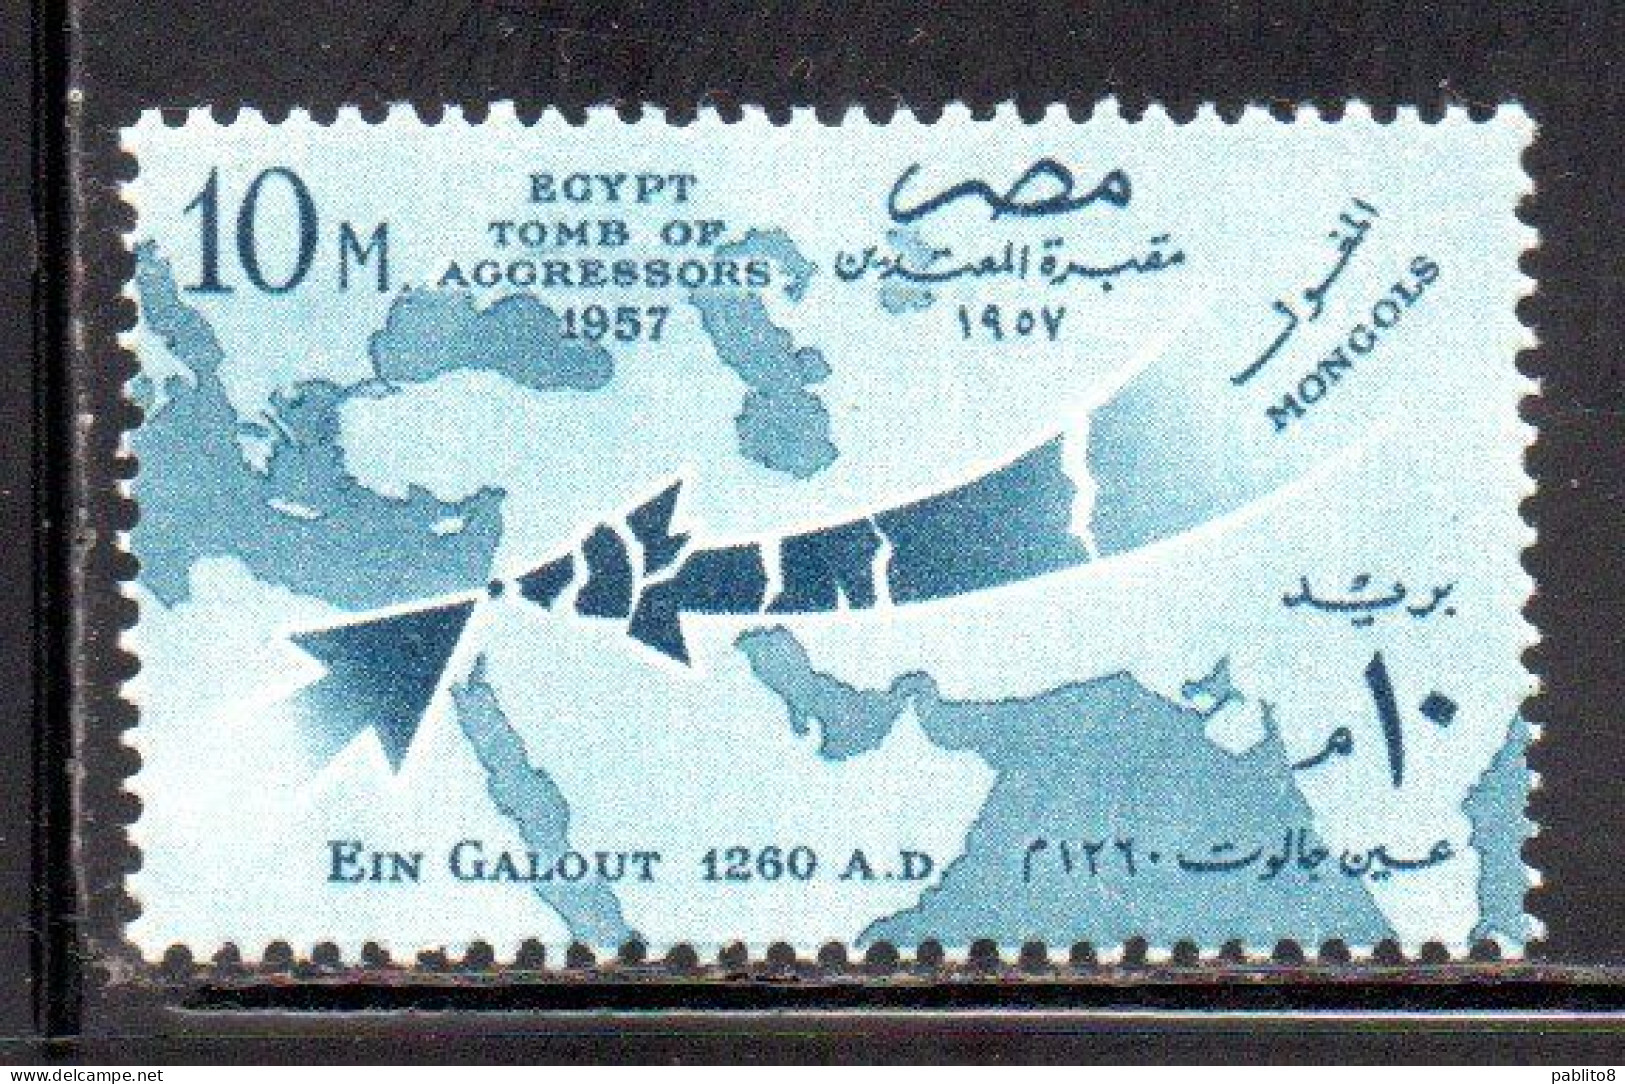 UAR EGYPT EGITTO 1957 TOMB OF AGGRESSORS 1957 MAP OF MIDDLE EAST EIN GALOUT 1260 10m MH - Ungebraucht